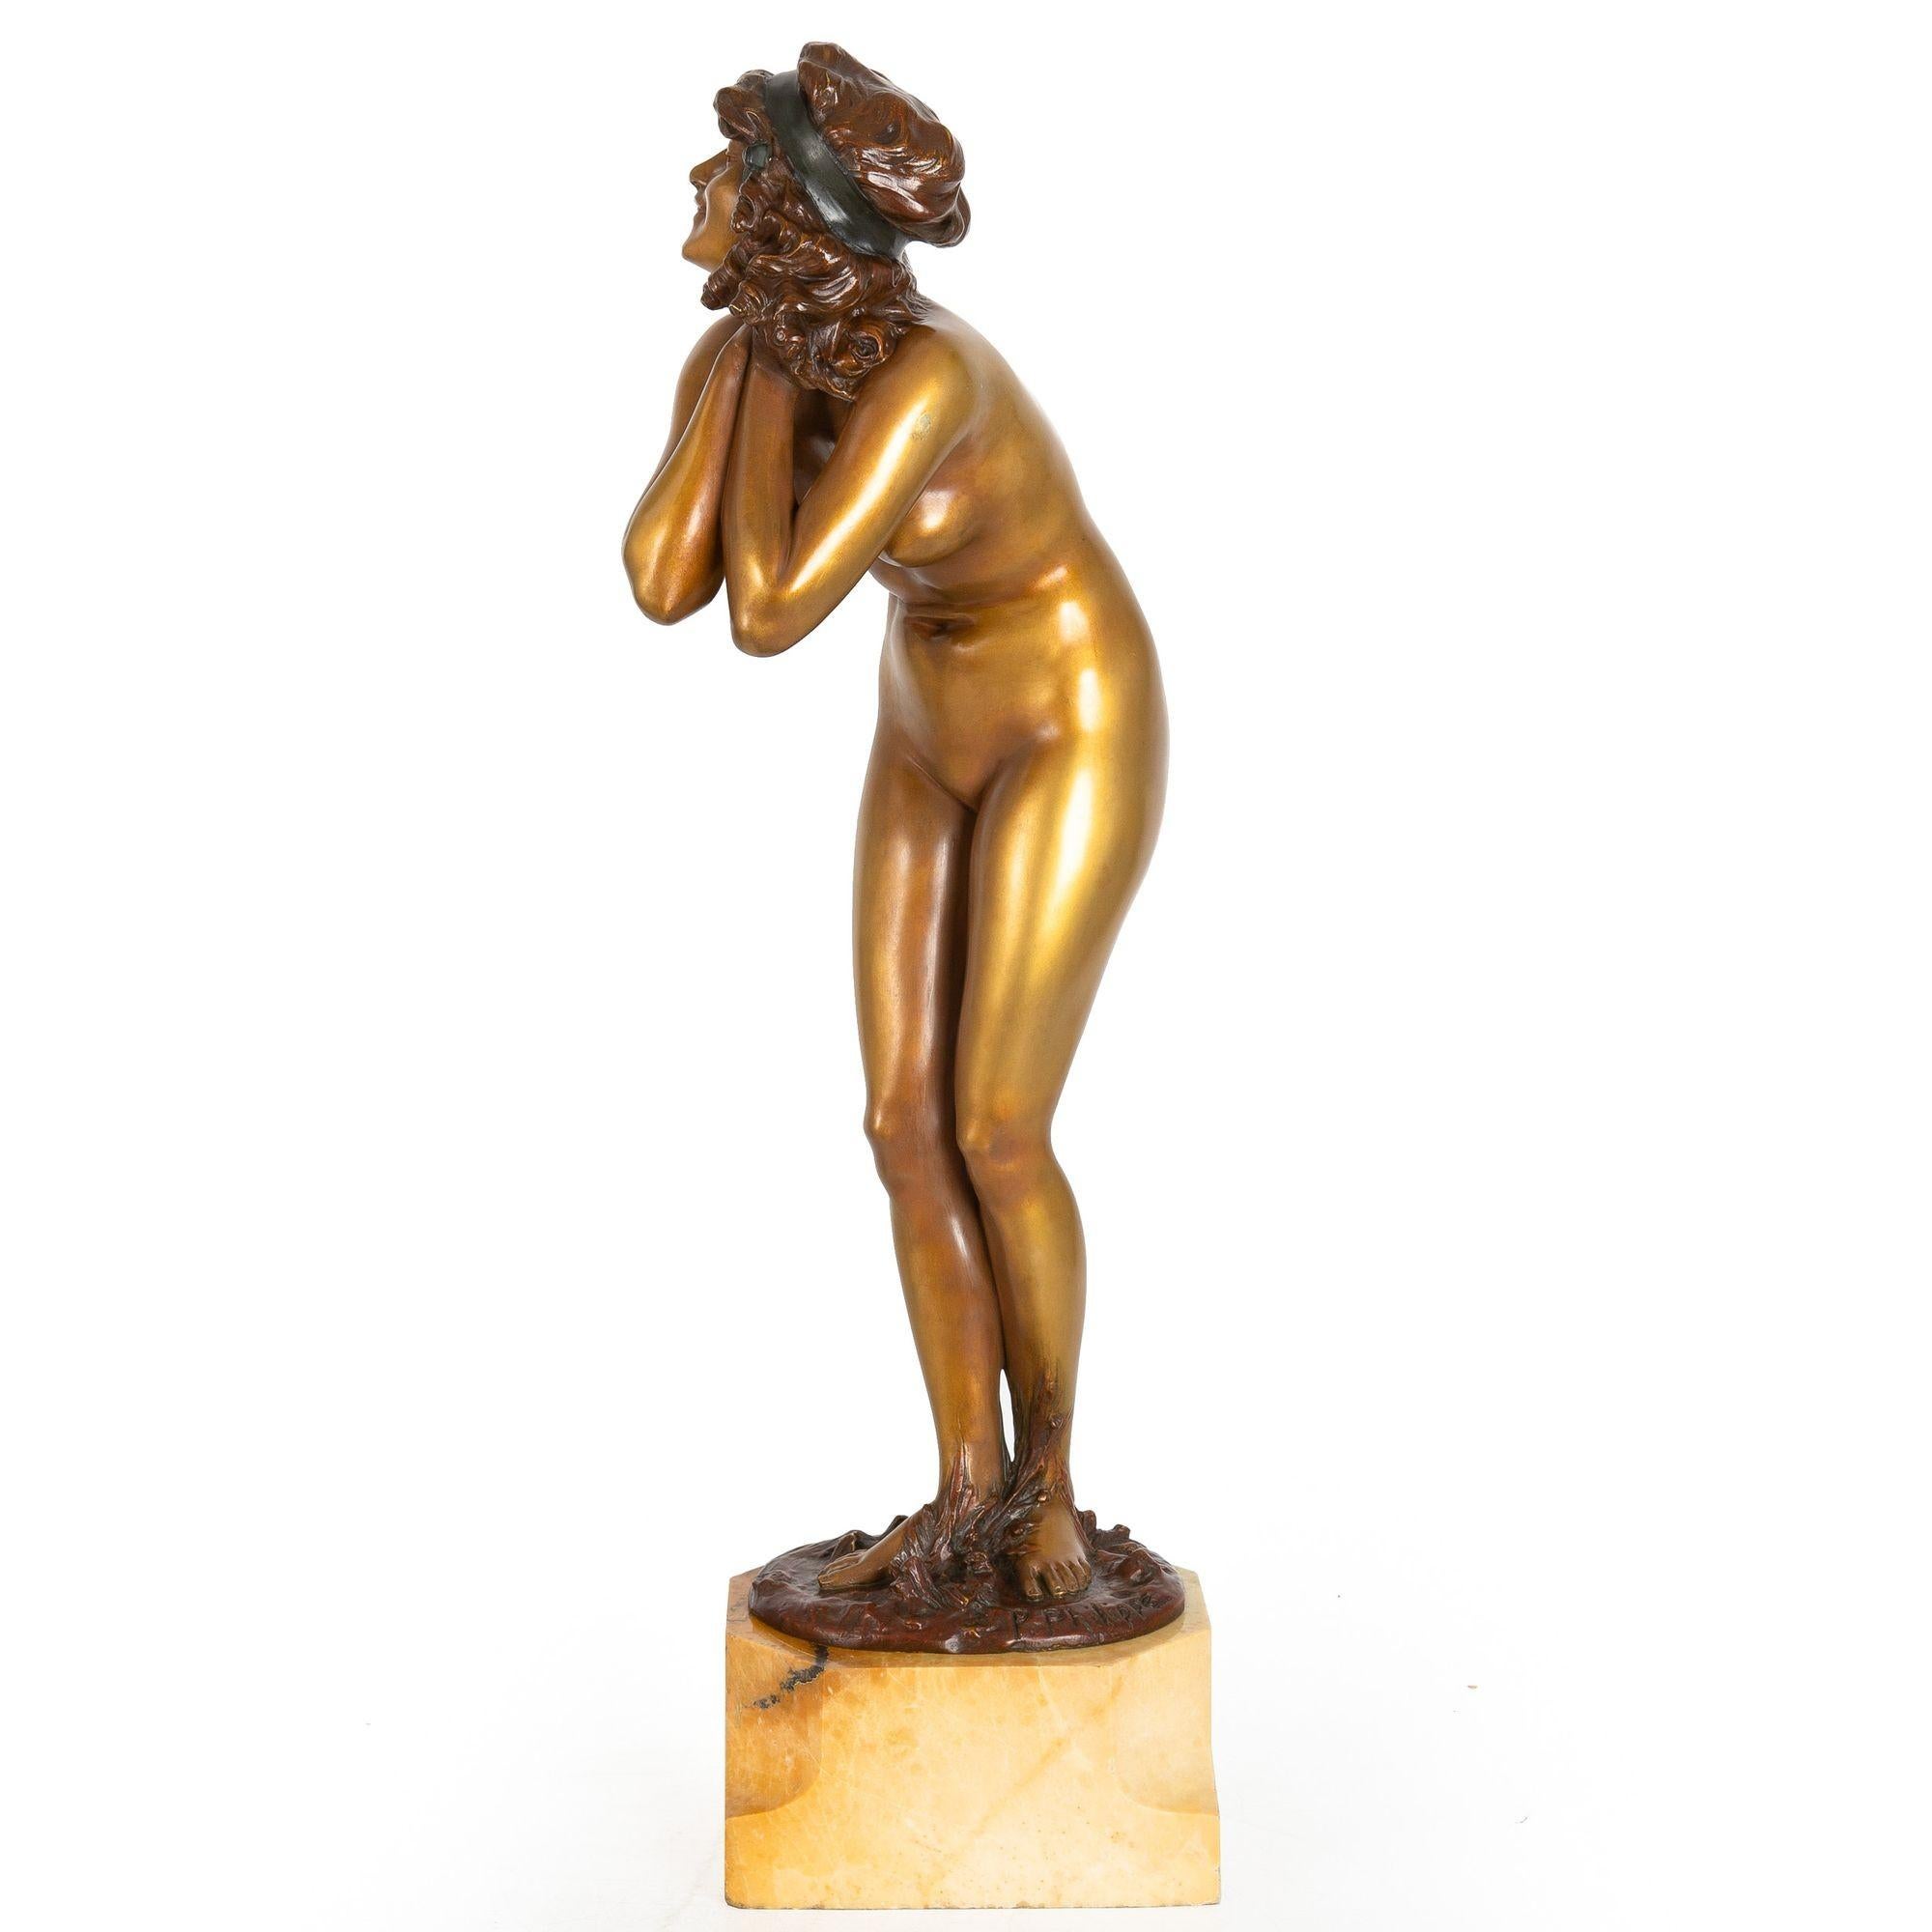 Rare Art Deco Bronze Sculpture “Mischievous” by Paul Philippe In Good Condition For Sale In Shippensburg, PA